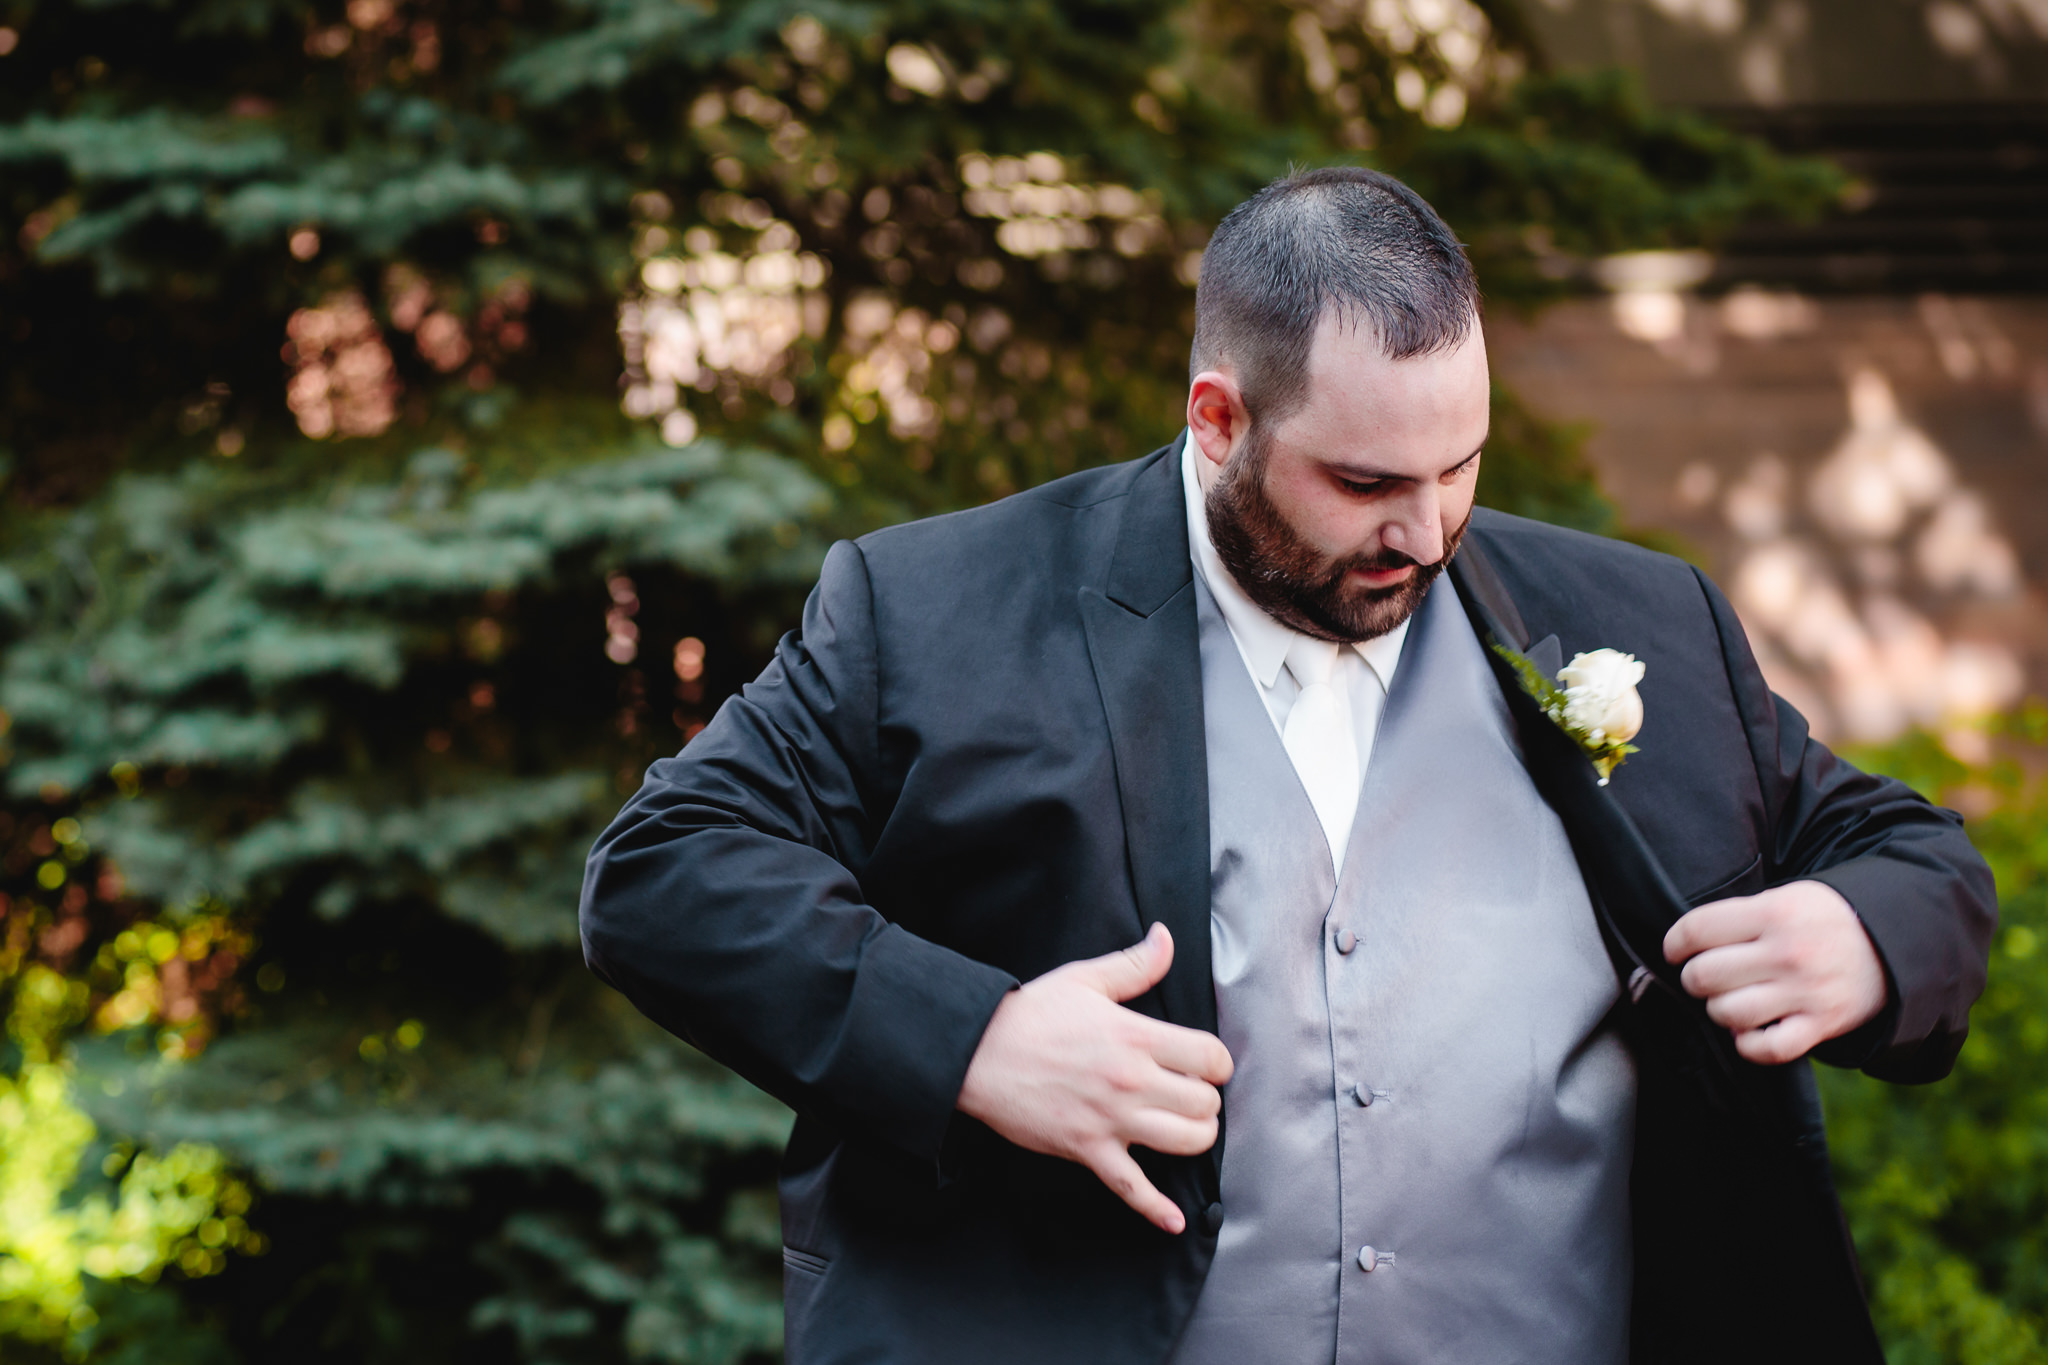 Groom gets ready for his wedding at Duquesne University